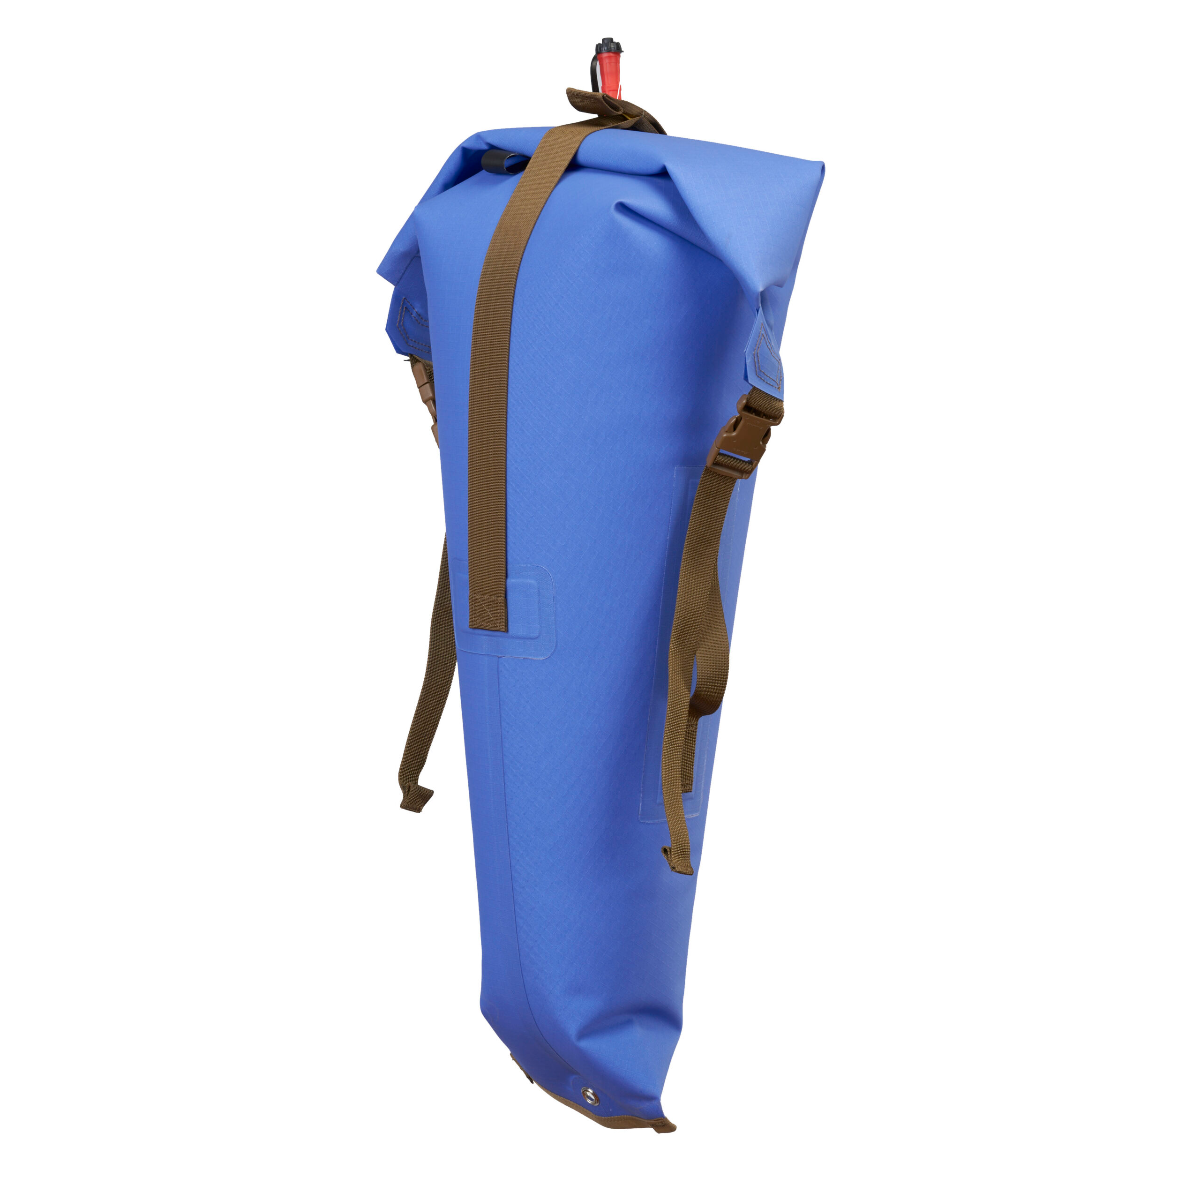 Featuring the Futa Kayak Stow Float dry bag, kayak flotation, kayak outfitting manufactured by Watershed shown here from a fifth angle.